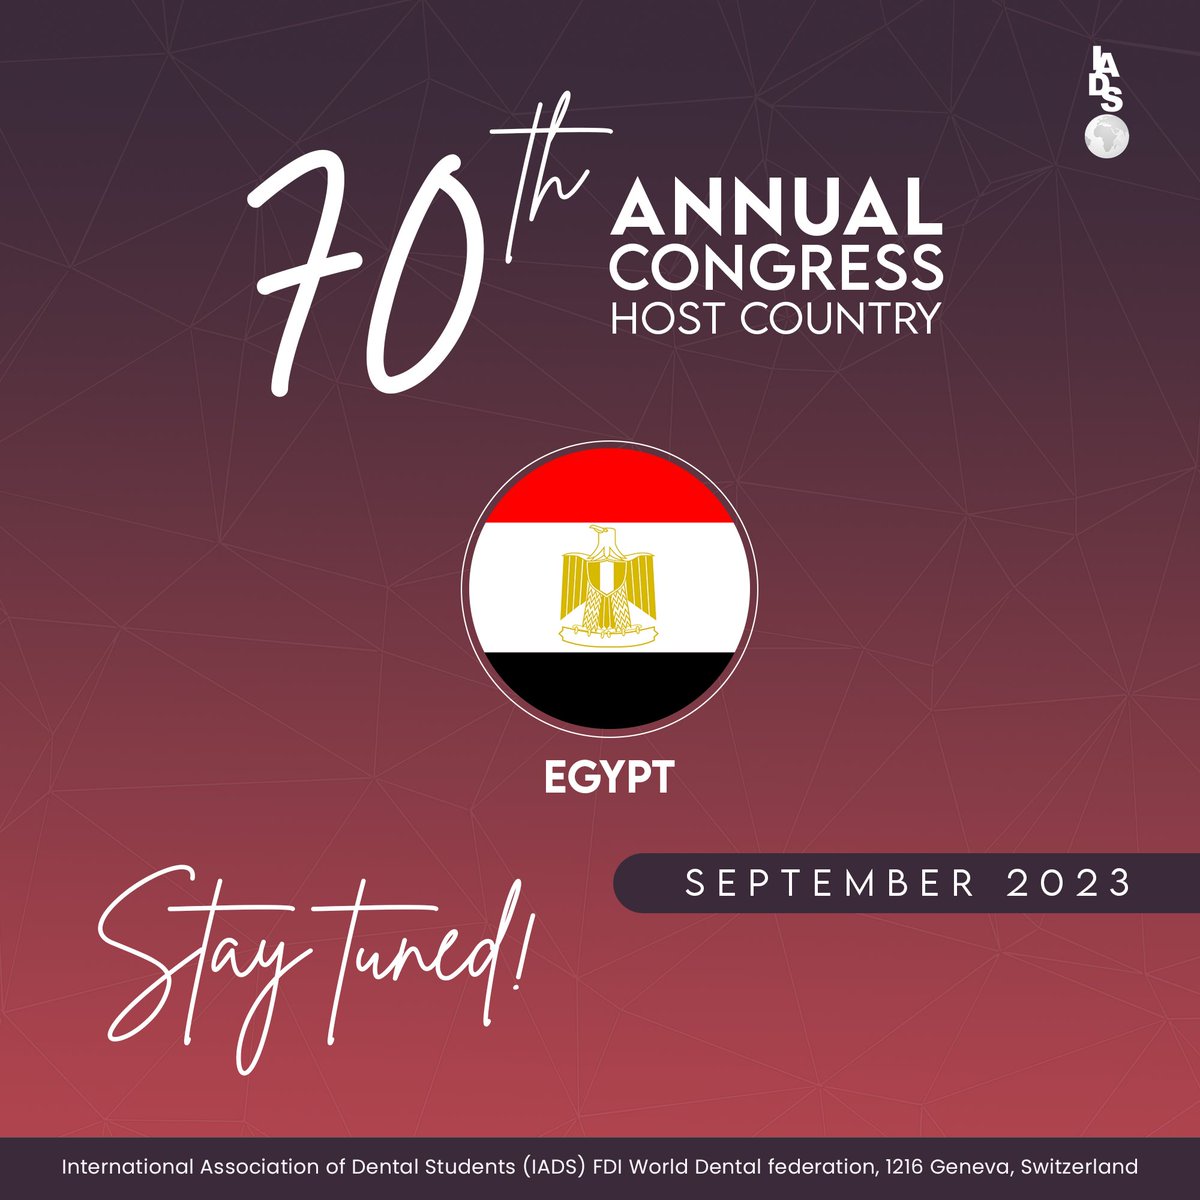 We are glad to announce host country for 70th Annual Congress! Based on the decision made during the General Assembly in Kyrenia, IADS Executive Committee with the help of Local Organising Committee will host AC in Egypt. We cannot wait to see you there! Stay tuned! 👀